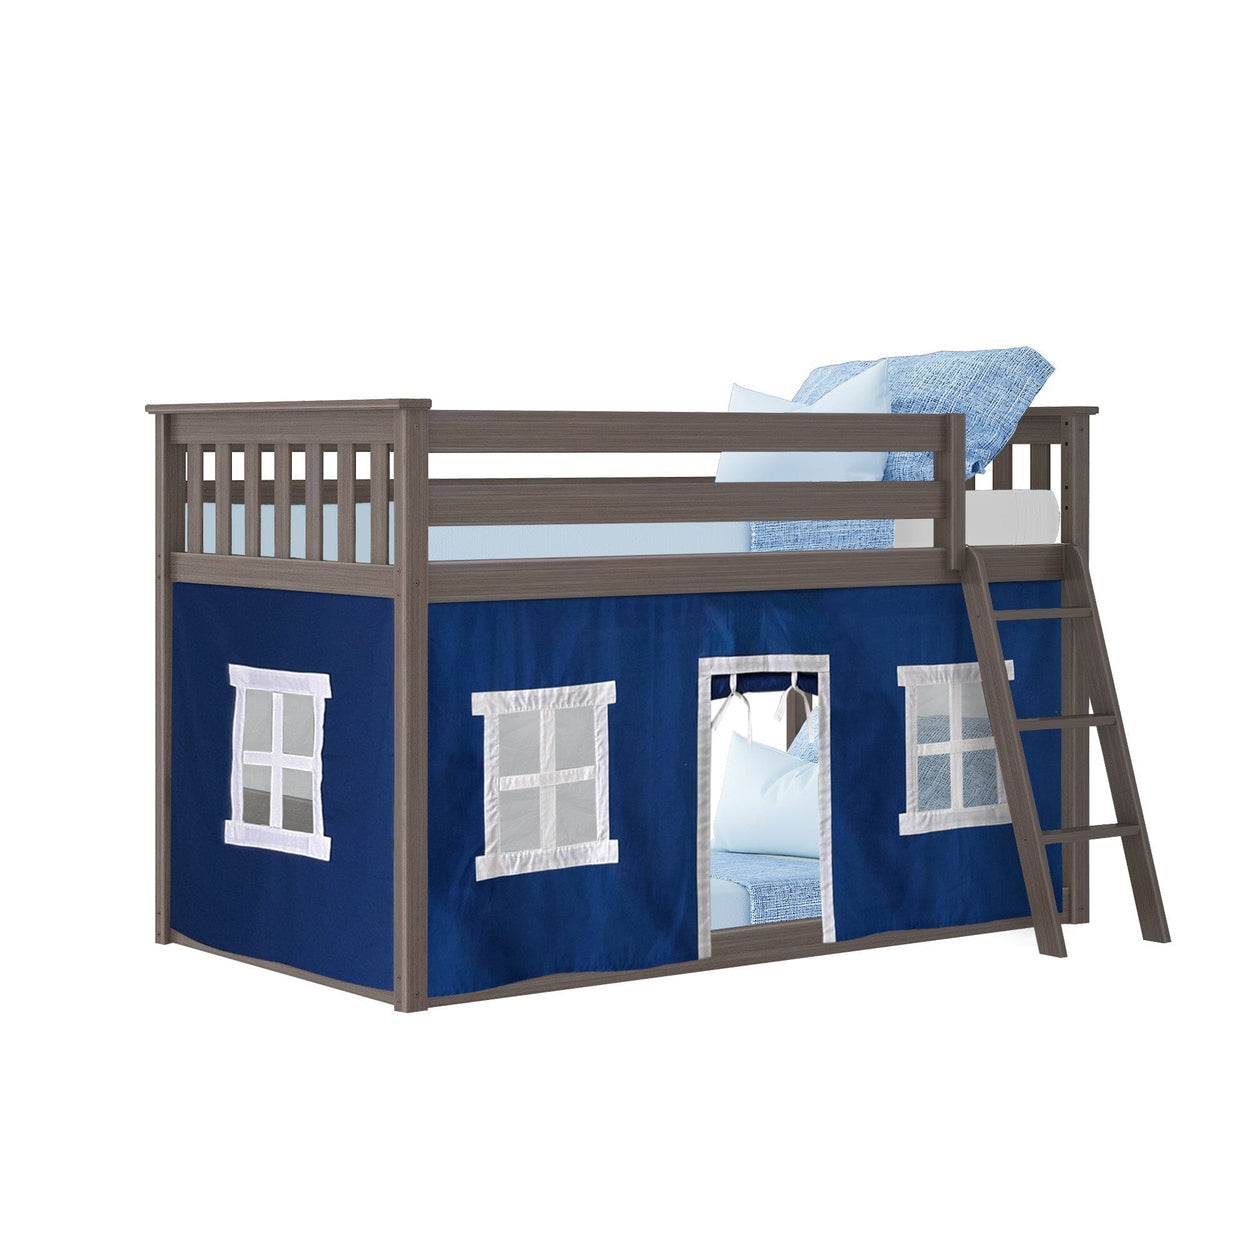 180214151022 : Bunk Beds Twin-Size Low Bunk Bed With Curtain, Clay + Blue